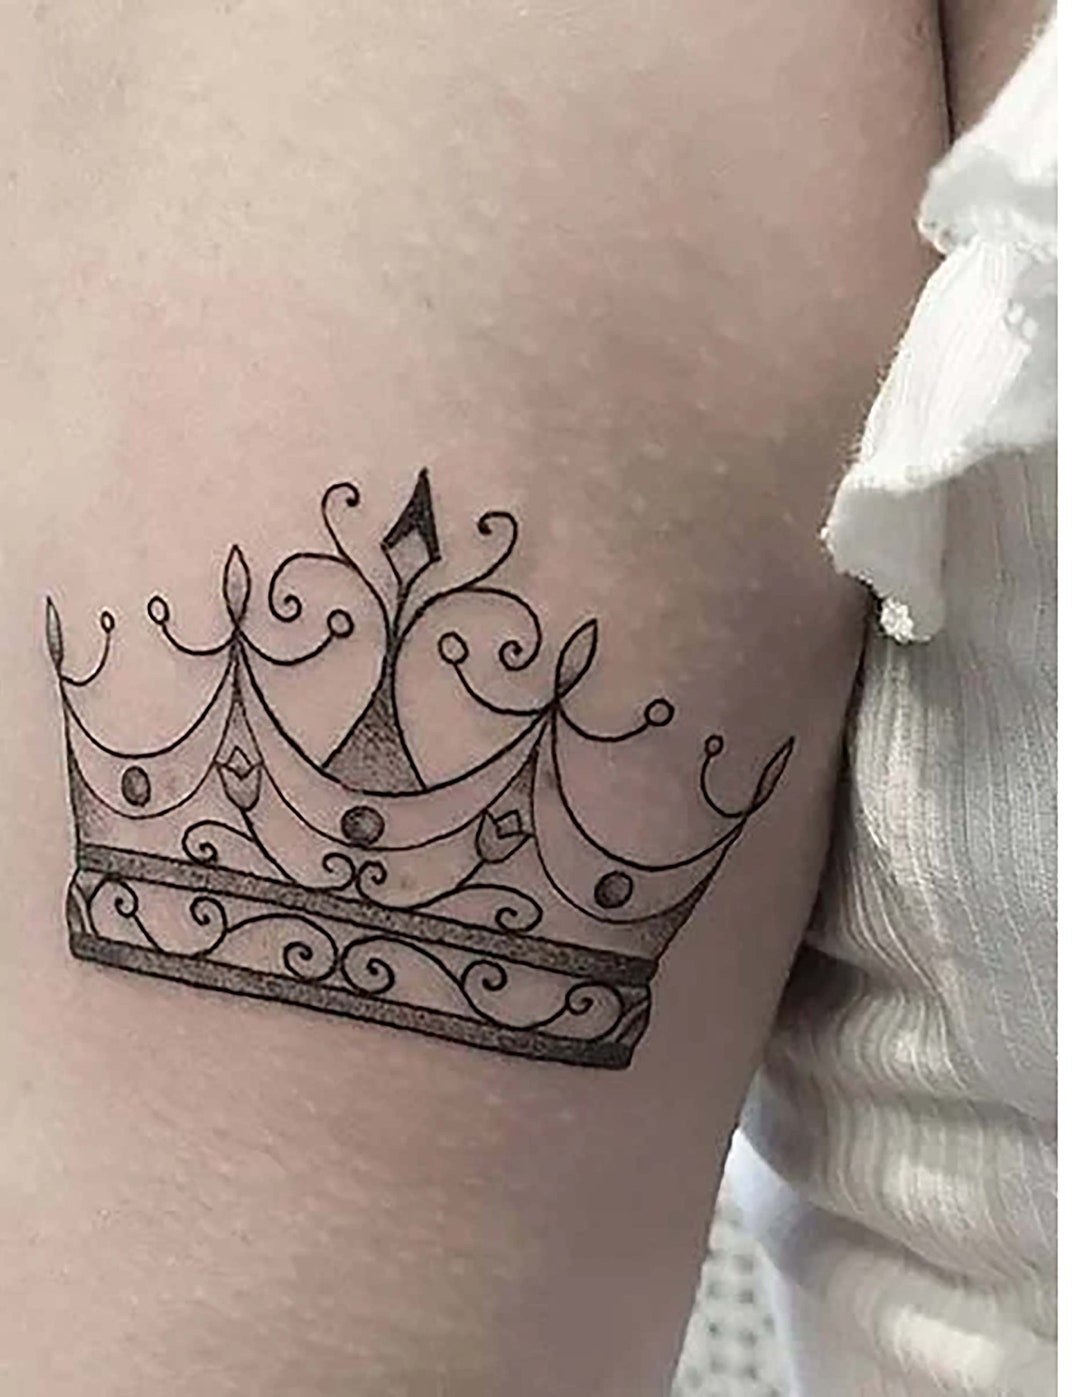 Aggregate more than 63 never tip the crown tattoo  ineteachers